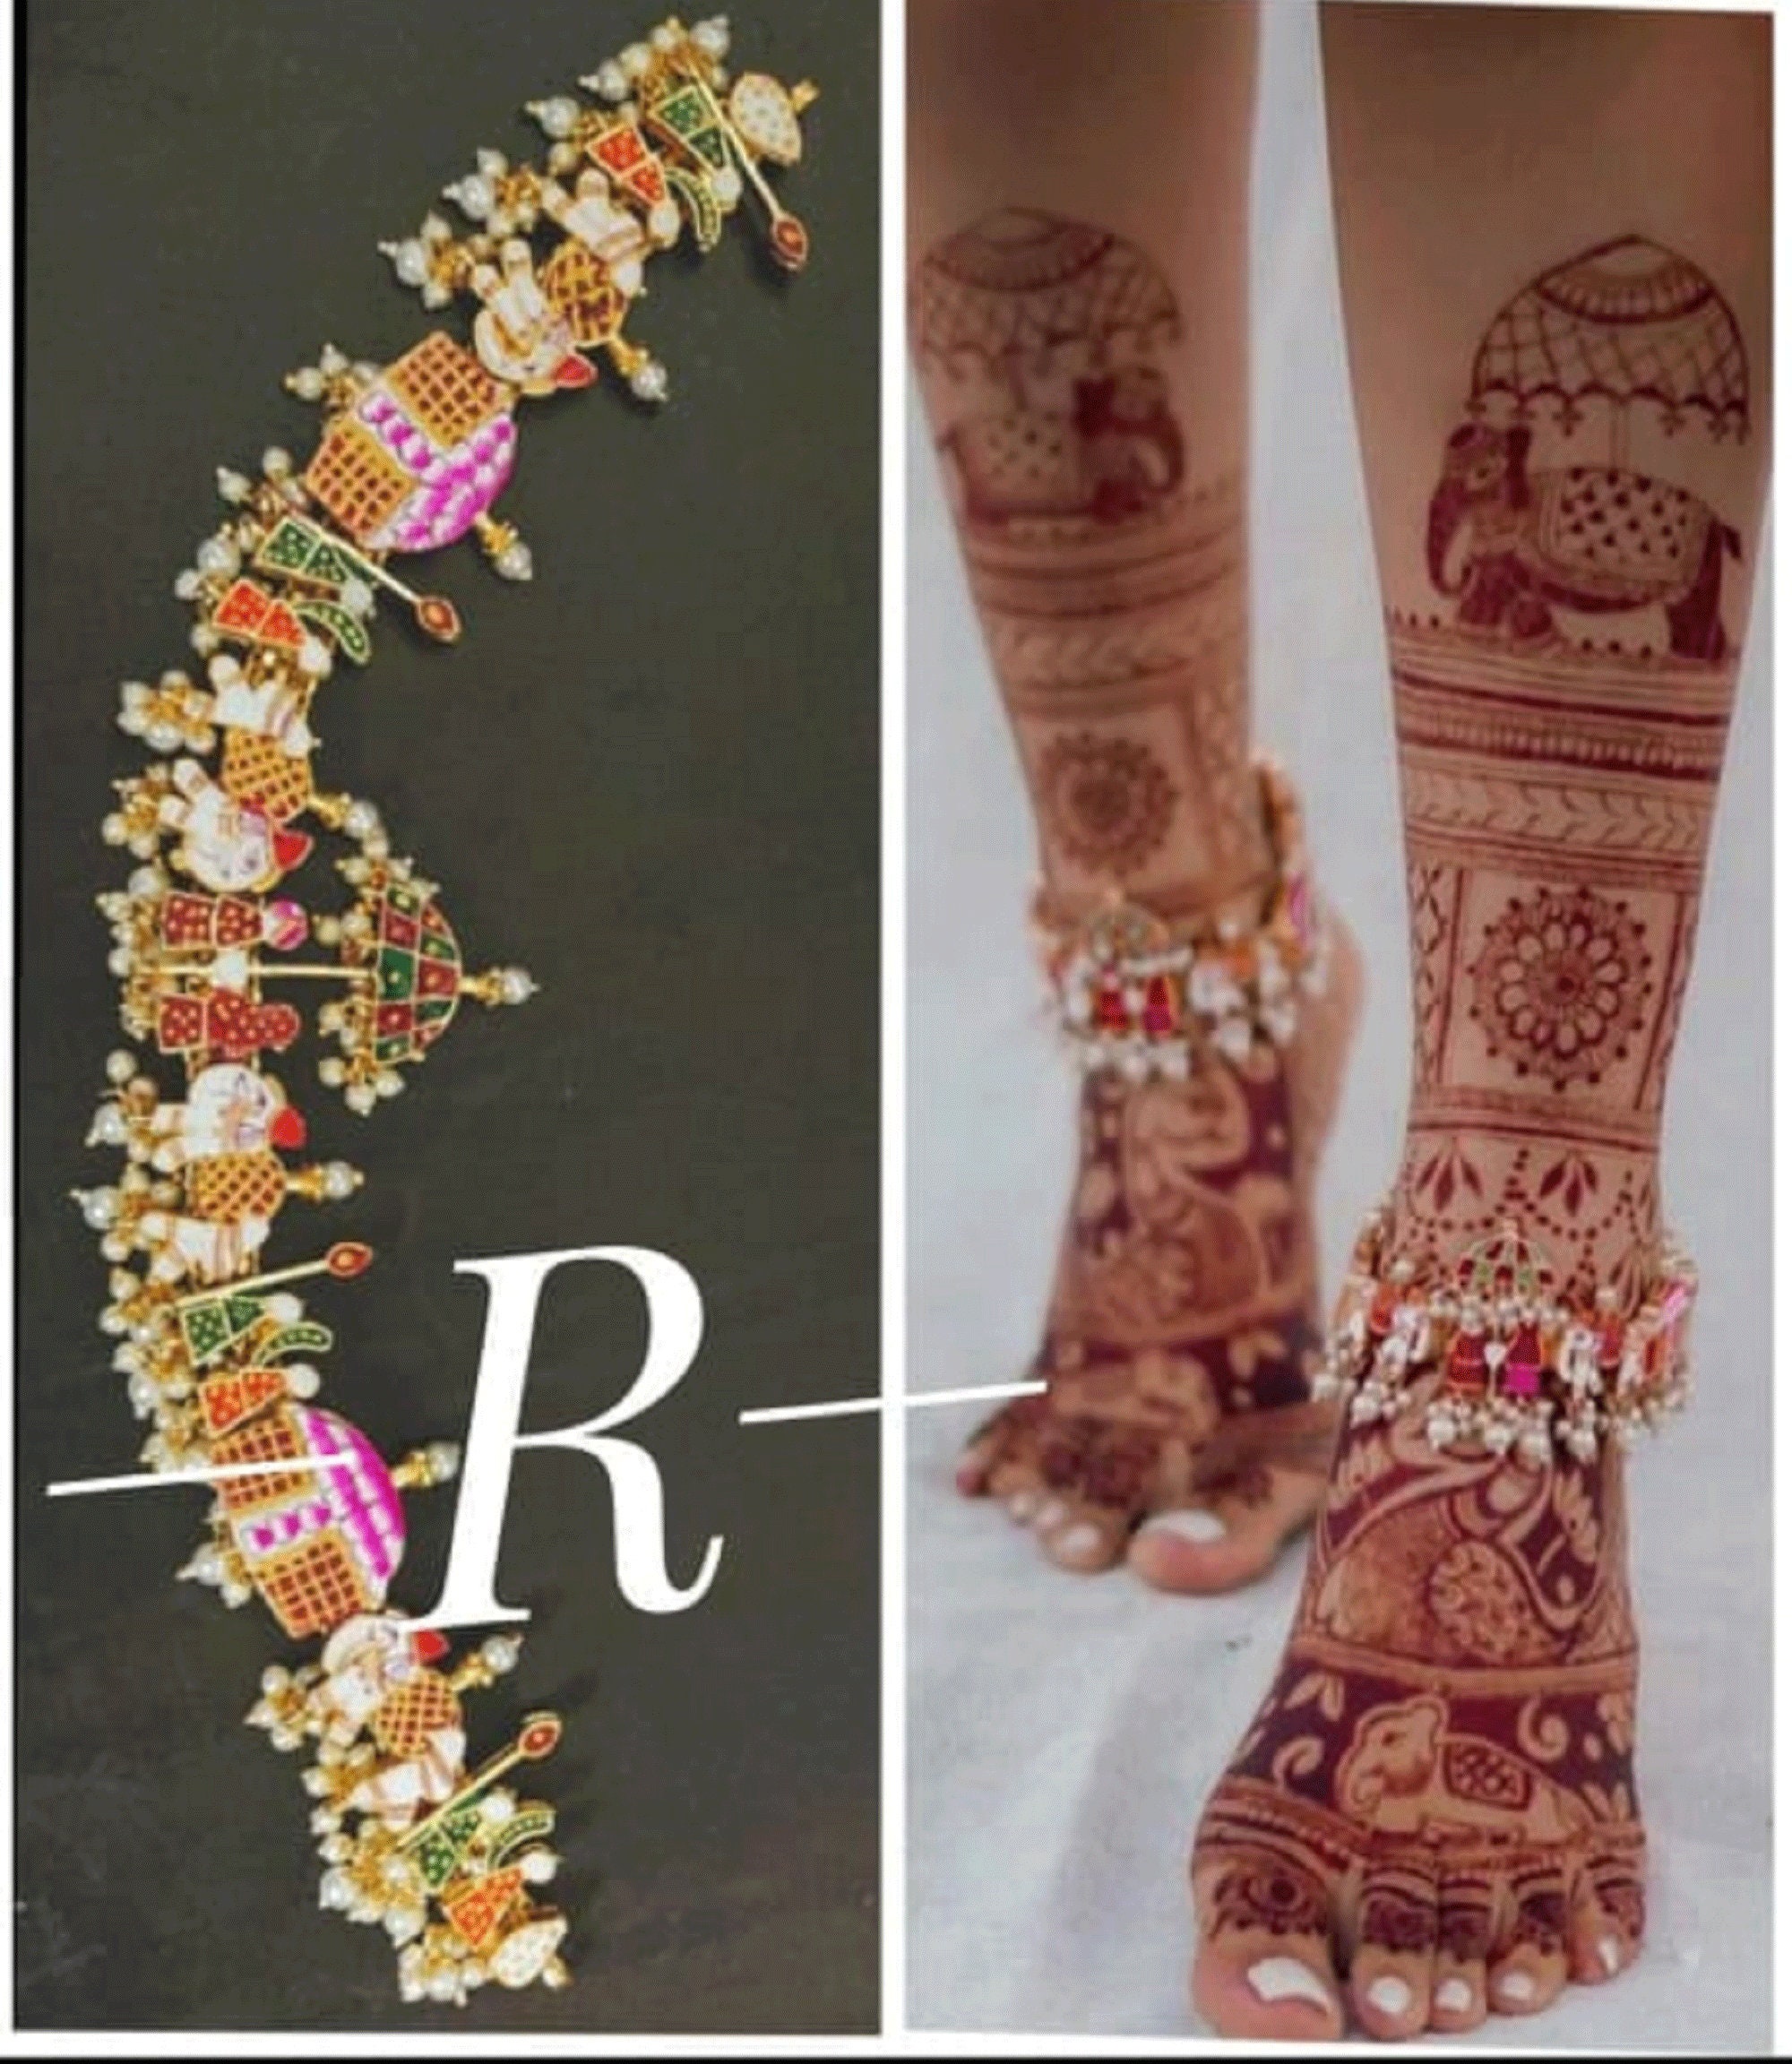 Tattoo uploaded by Vipul Chaudhary • Couple tattoo |Tattoo for couples  |Couples tattoo ideas • Tattoodo